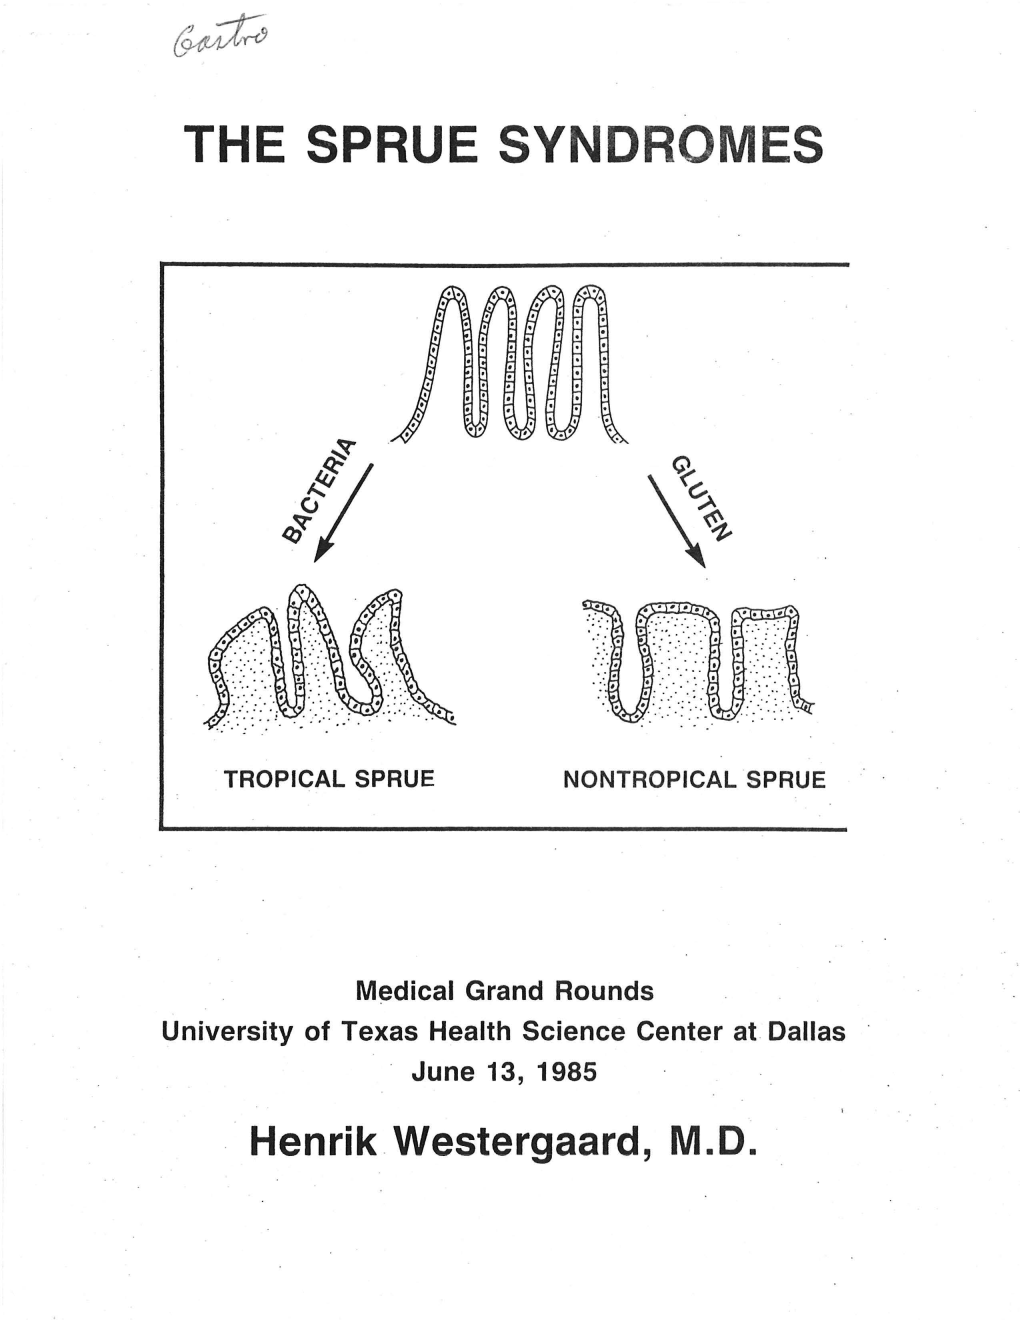 The Sprue Syndromes